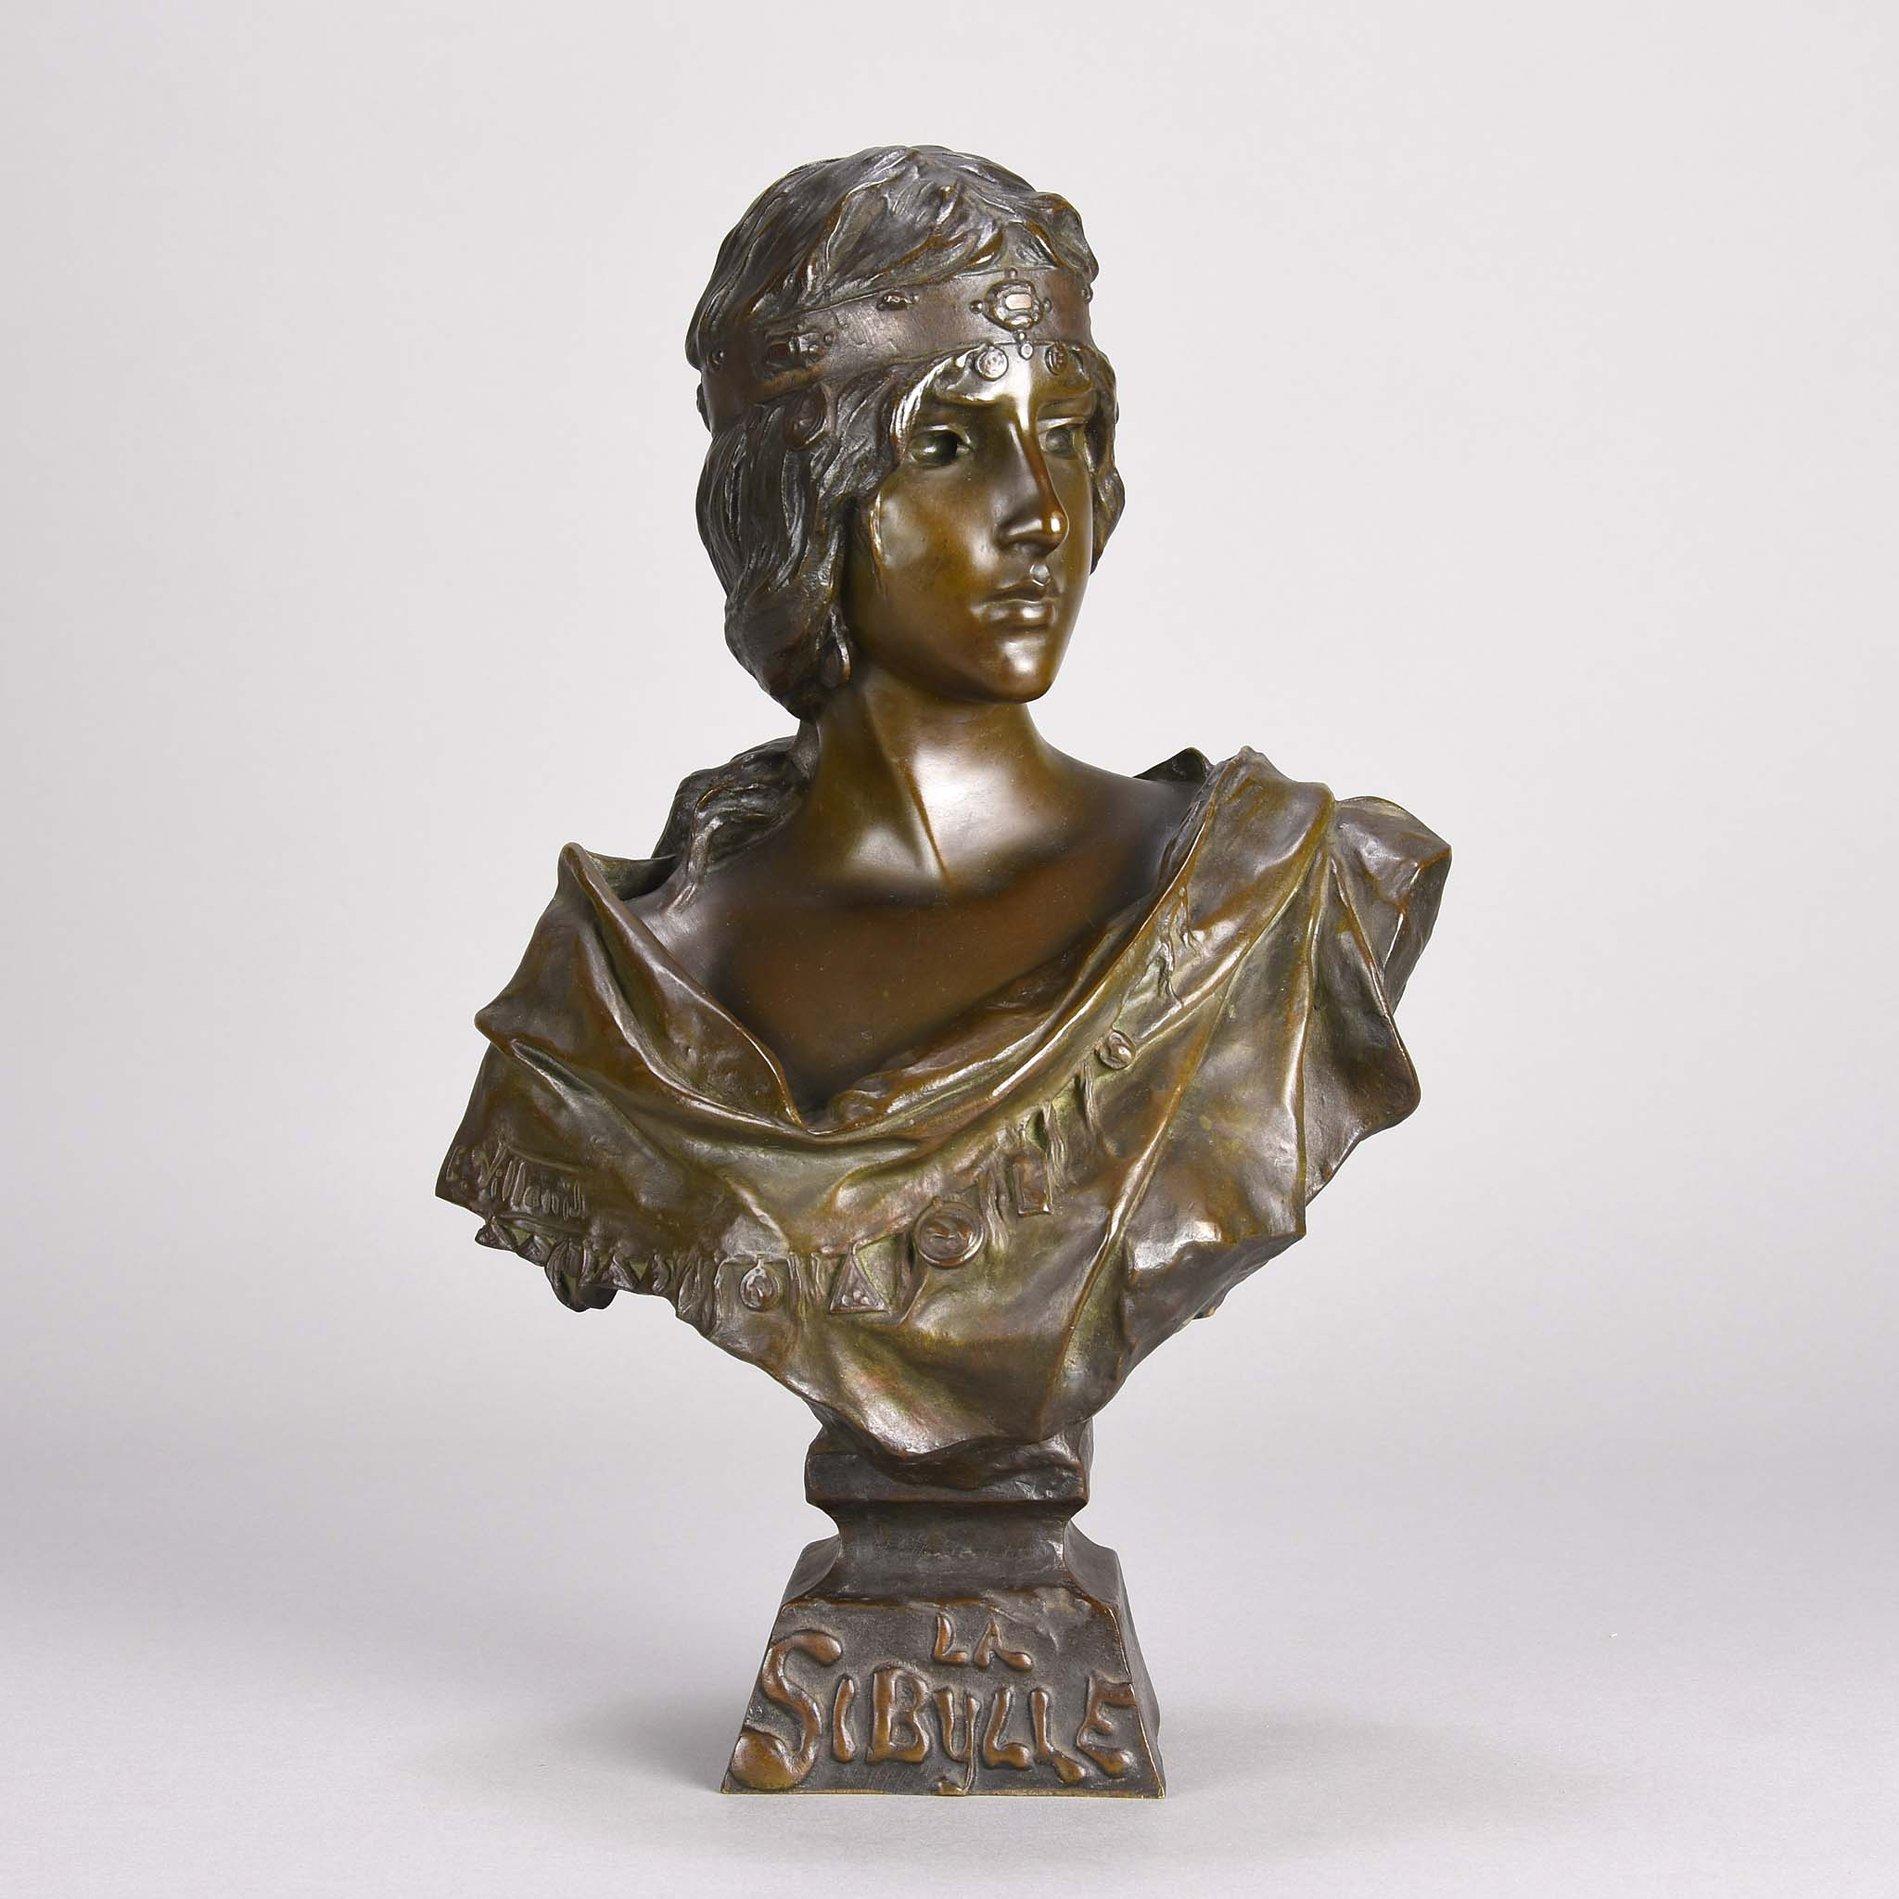 Beautiful late 19th century French Art Nouveau bronze bust of a young classical woman wearing a head dress decorated with medallions exhibiting good hand finished surface detail and rich brown and green patina. Titled, signed E Villanis and stamped